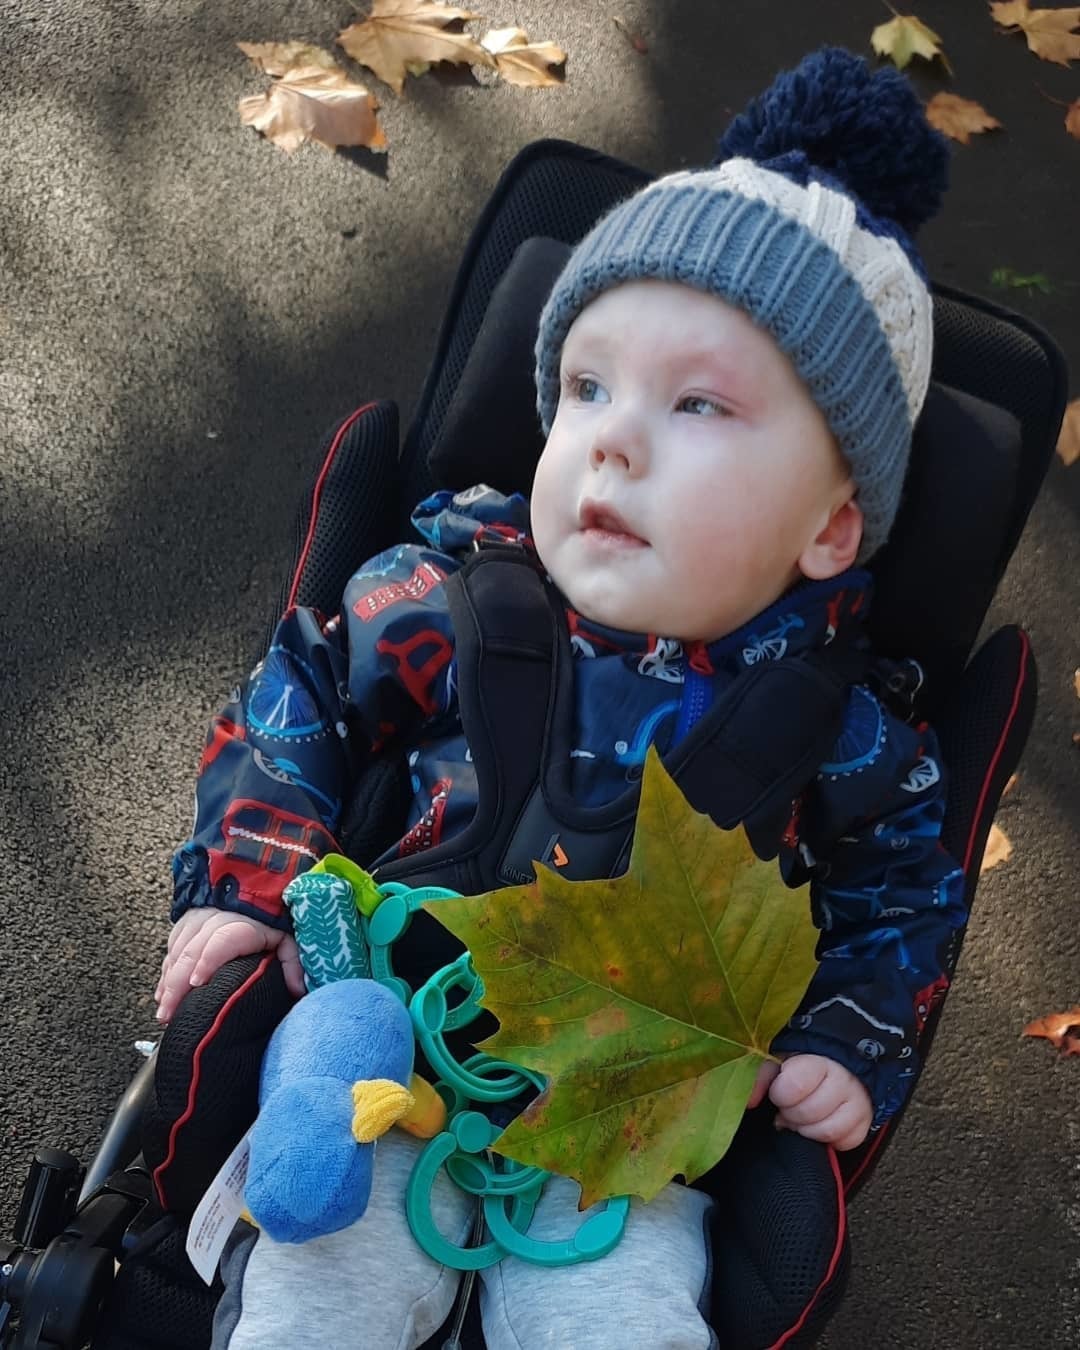 Theos parents are hopeful that he can one day take assisted steps